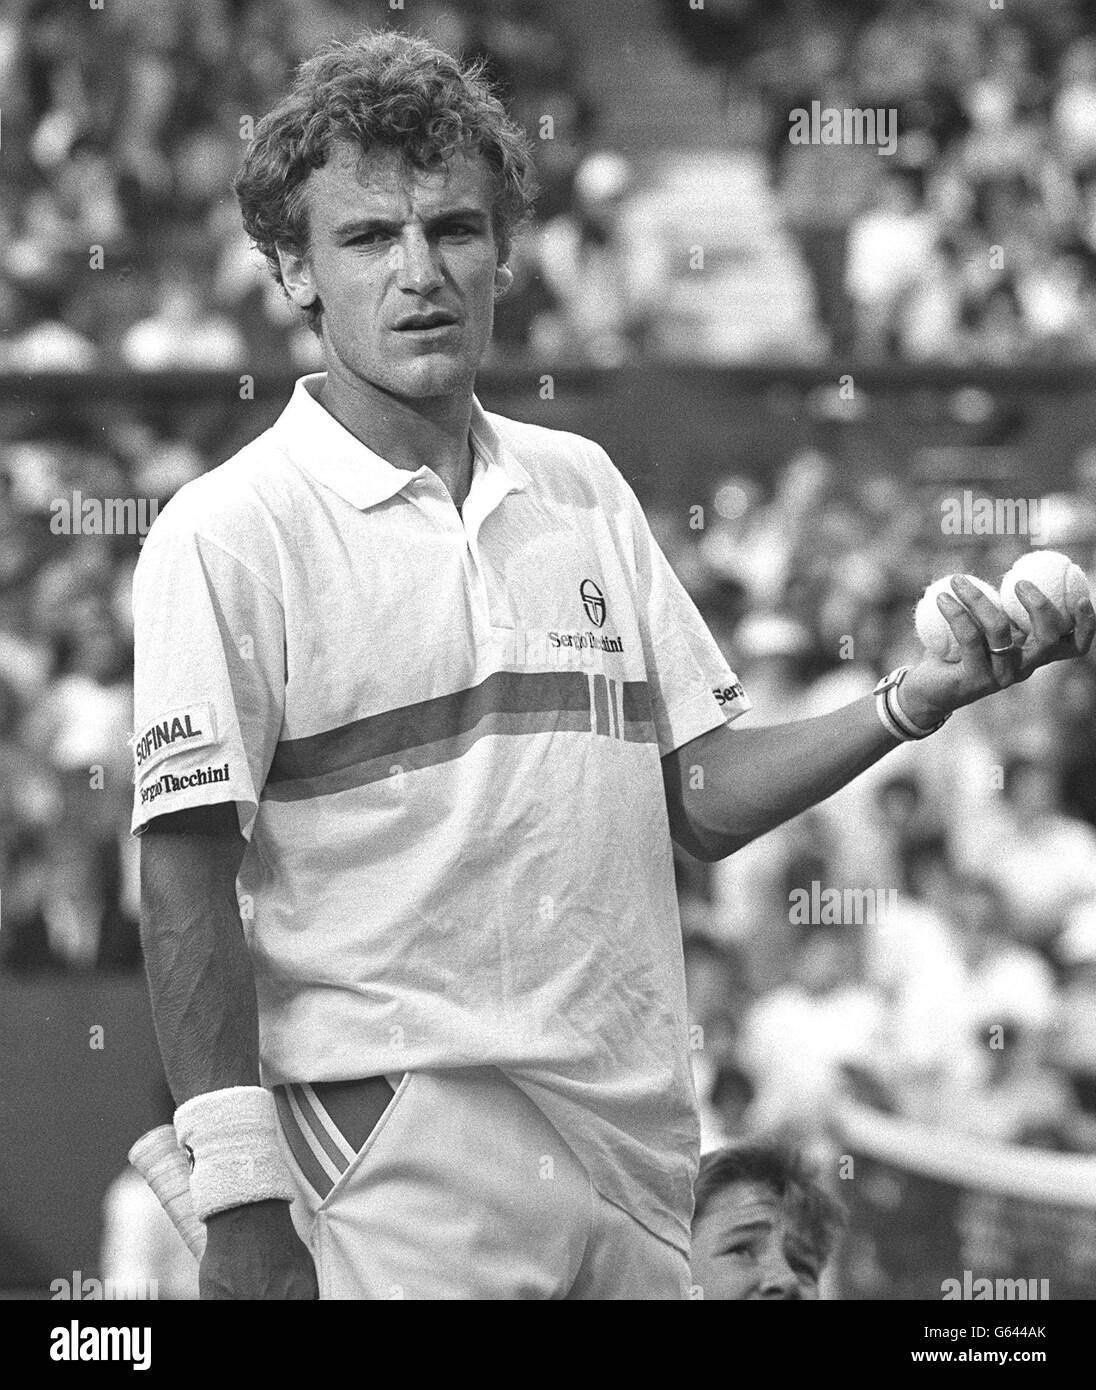 Mats wilander Black and White Stock Photos & Images - Alamy